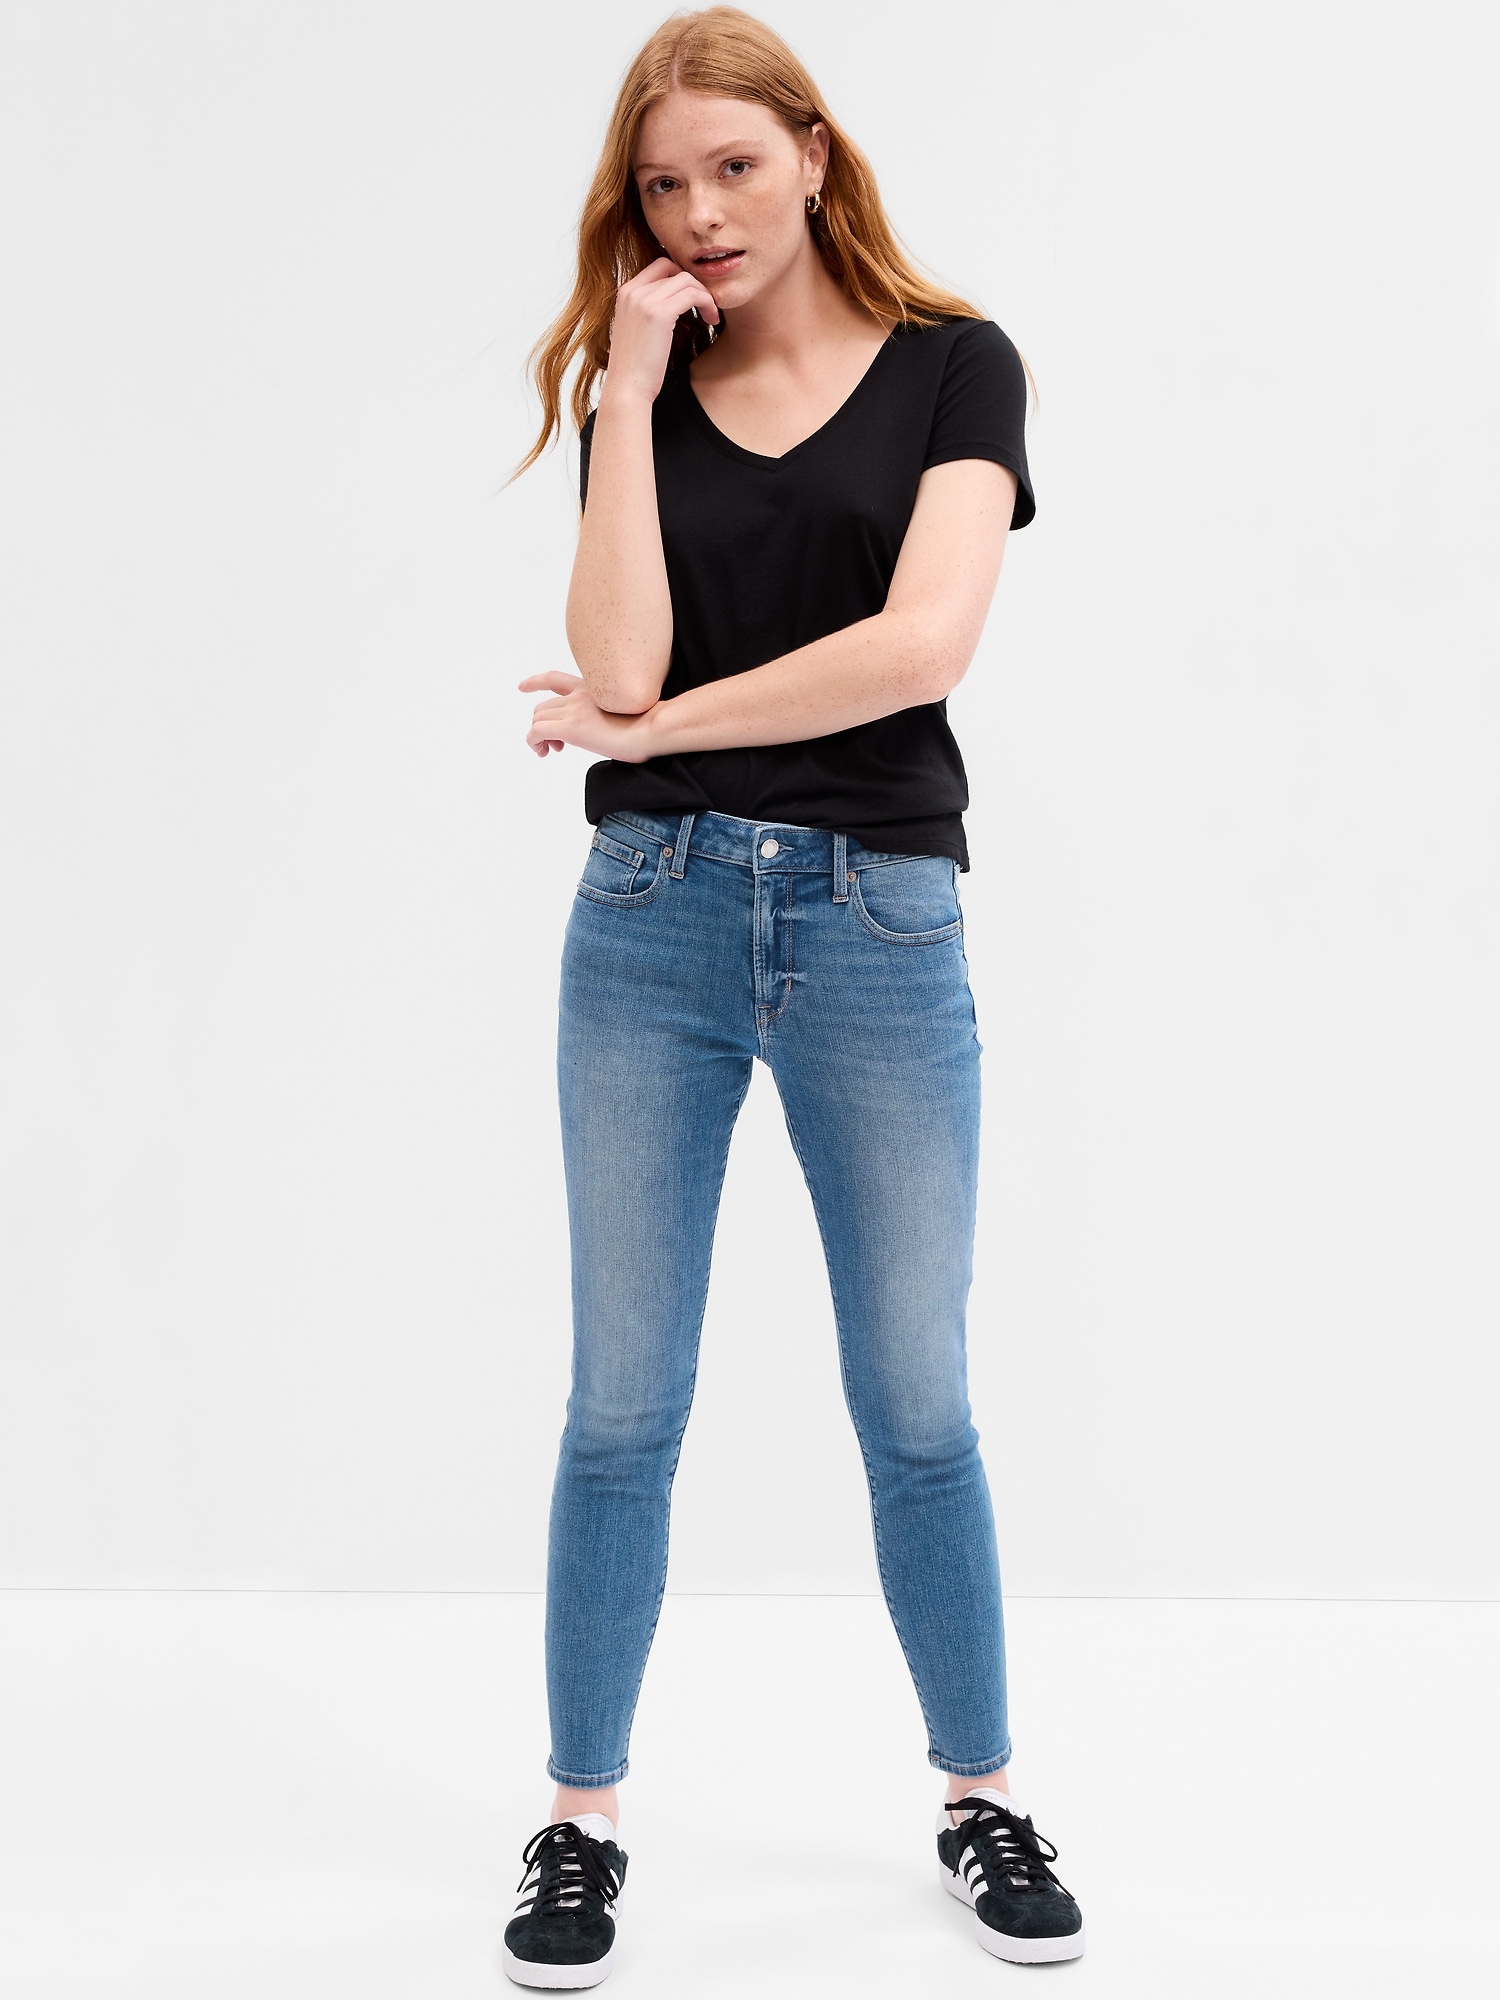 Gap High Rise Universal Legging Jeans with Washwell  Jean leggings,  Clothing coupons, Clothes for women